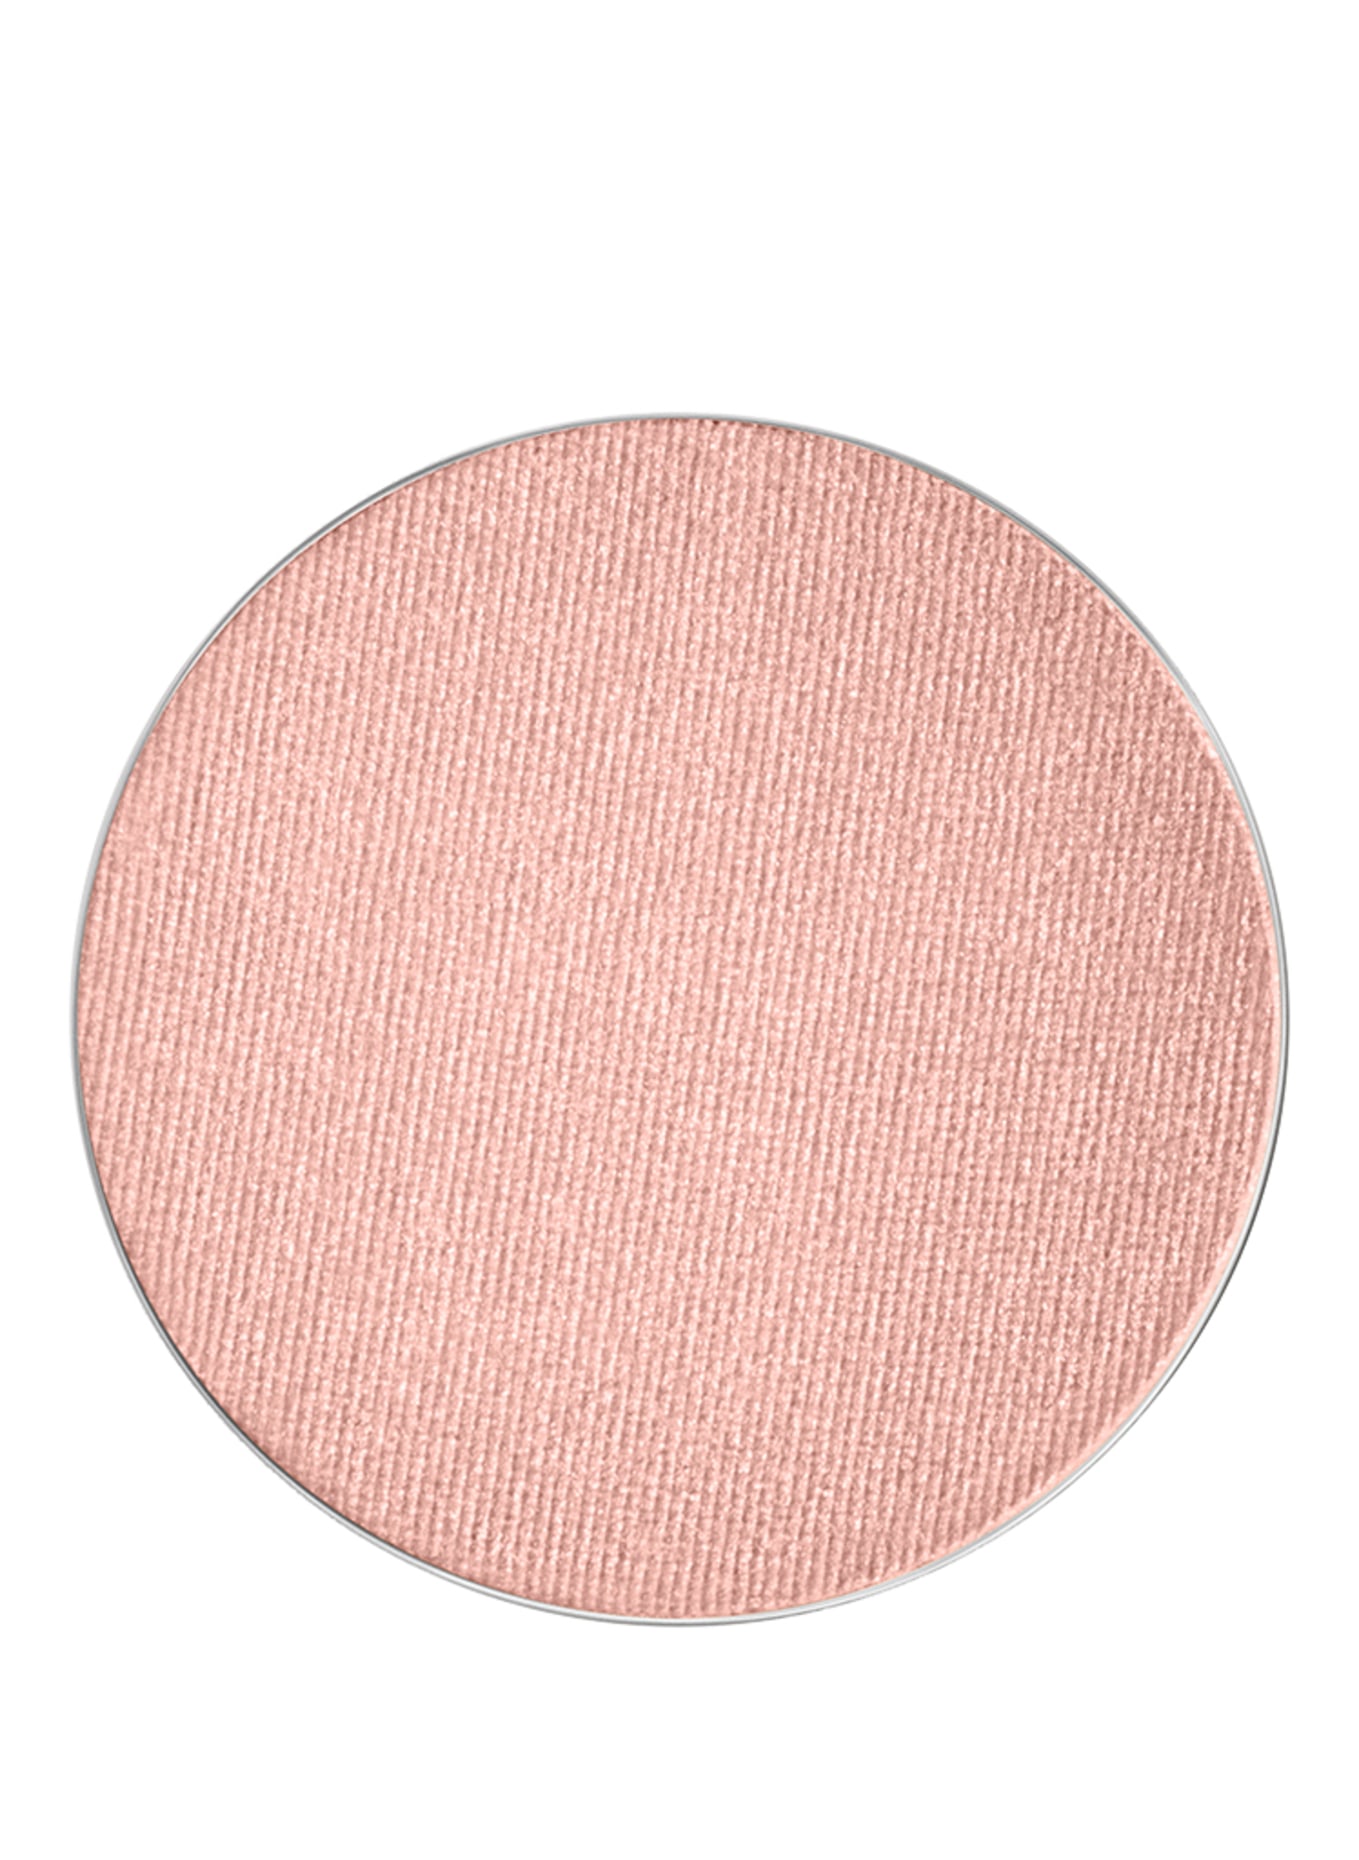 M.A.C PRO PALETTE REFILL, Farbe: NAKED LUNCH (Bild 1)